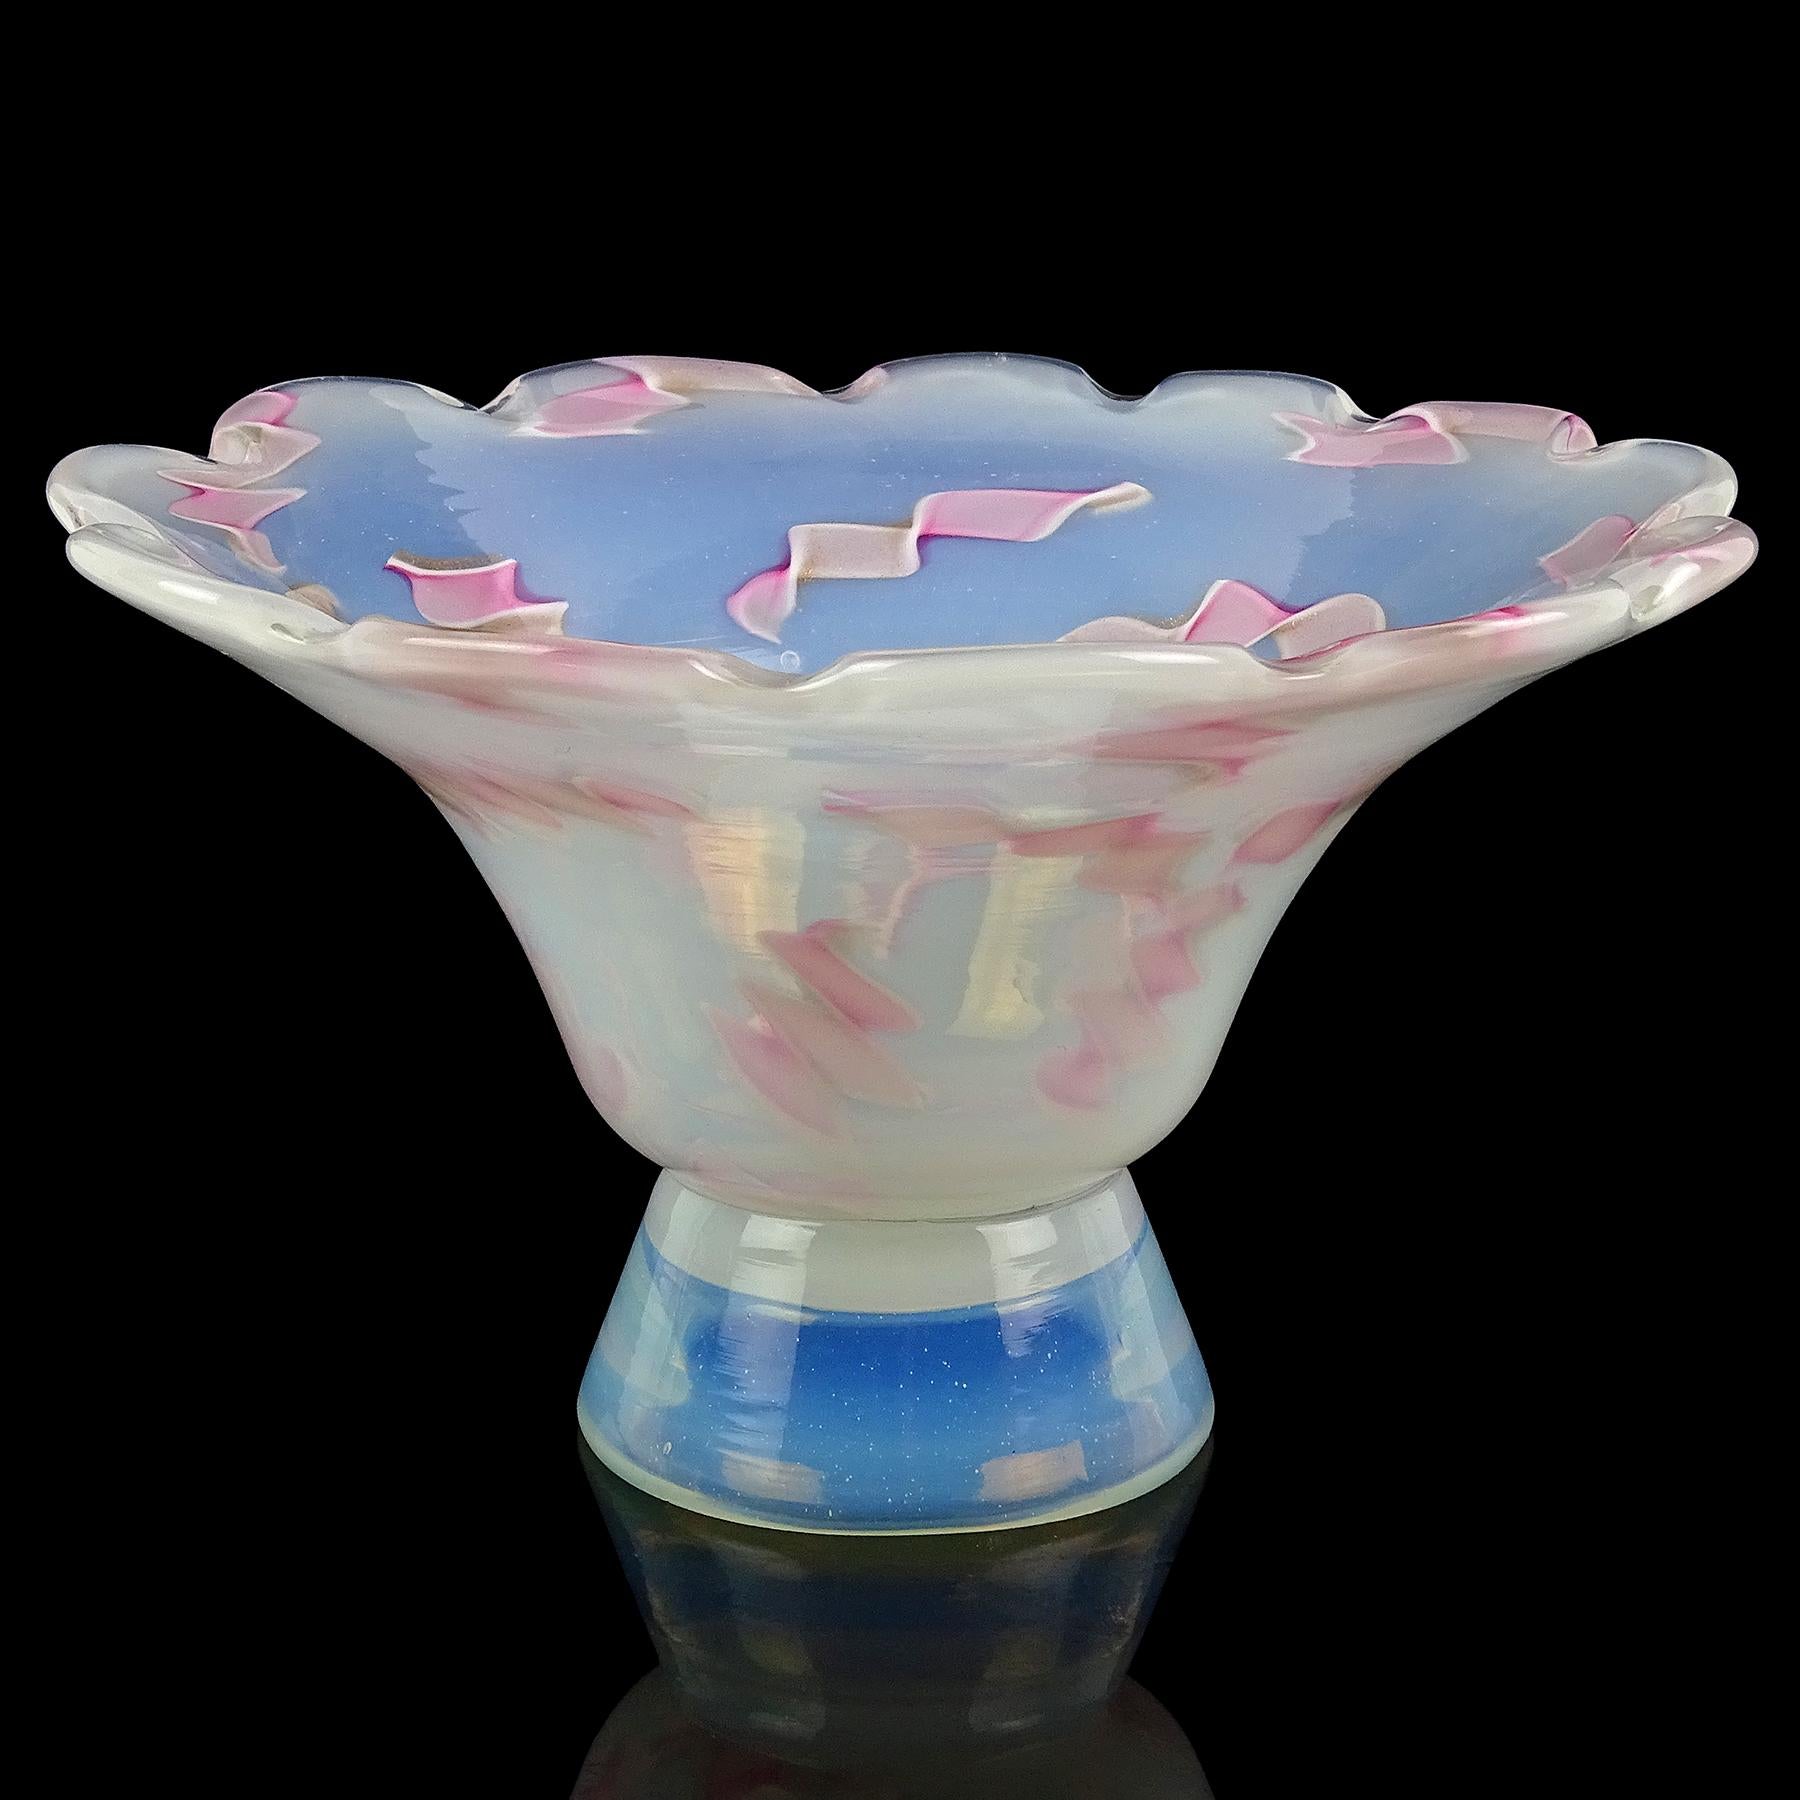 Beautiful vintage Murano hand blown opalescent white and twisted pink ribbons Italian art glass footed bowl. Documented to the Fratelli Toso Company, circa 1956. The bowl has a scalloped flared out rim. The ribbons have glittery copper aventurine